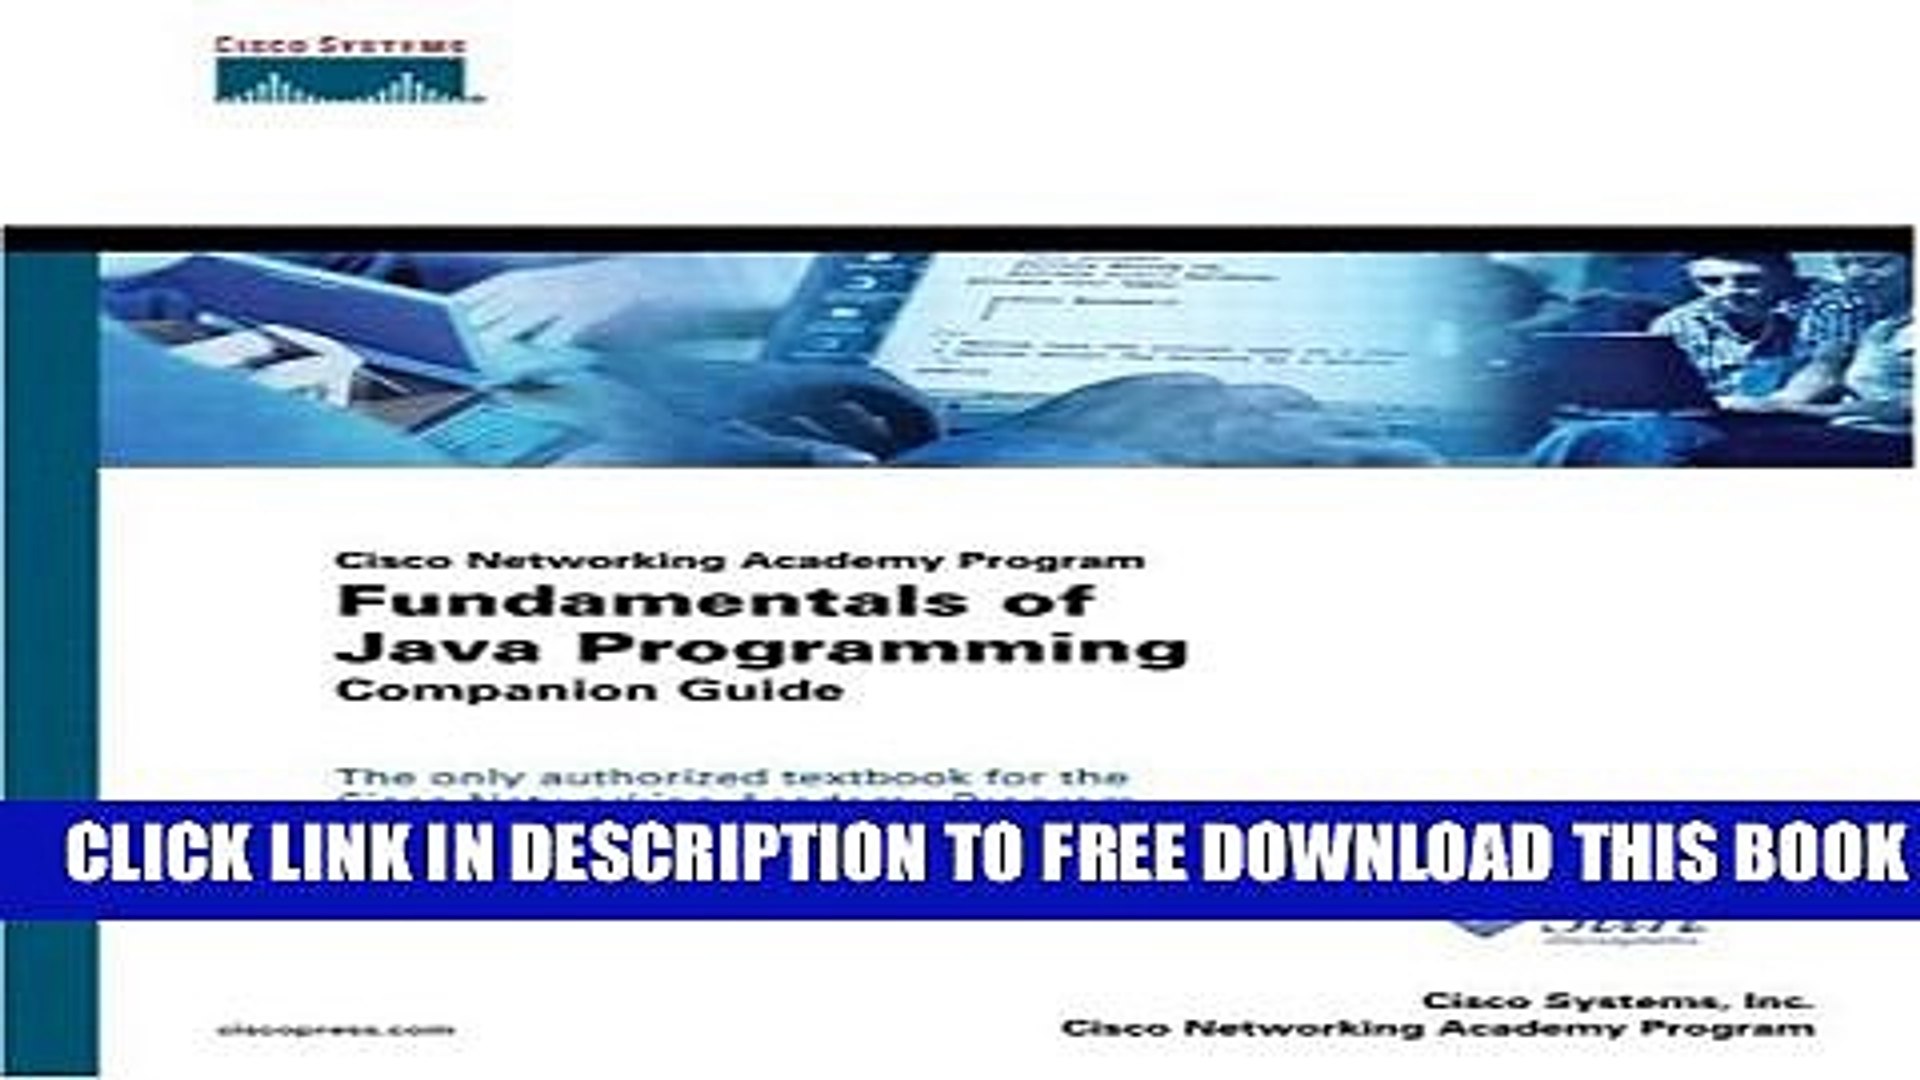 Collection Book Fundamentals of Java Programming Companion Guide (Cisco Networking Academy Program)